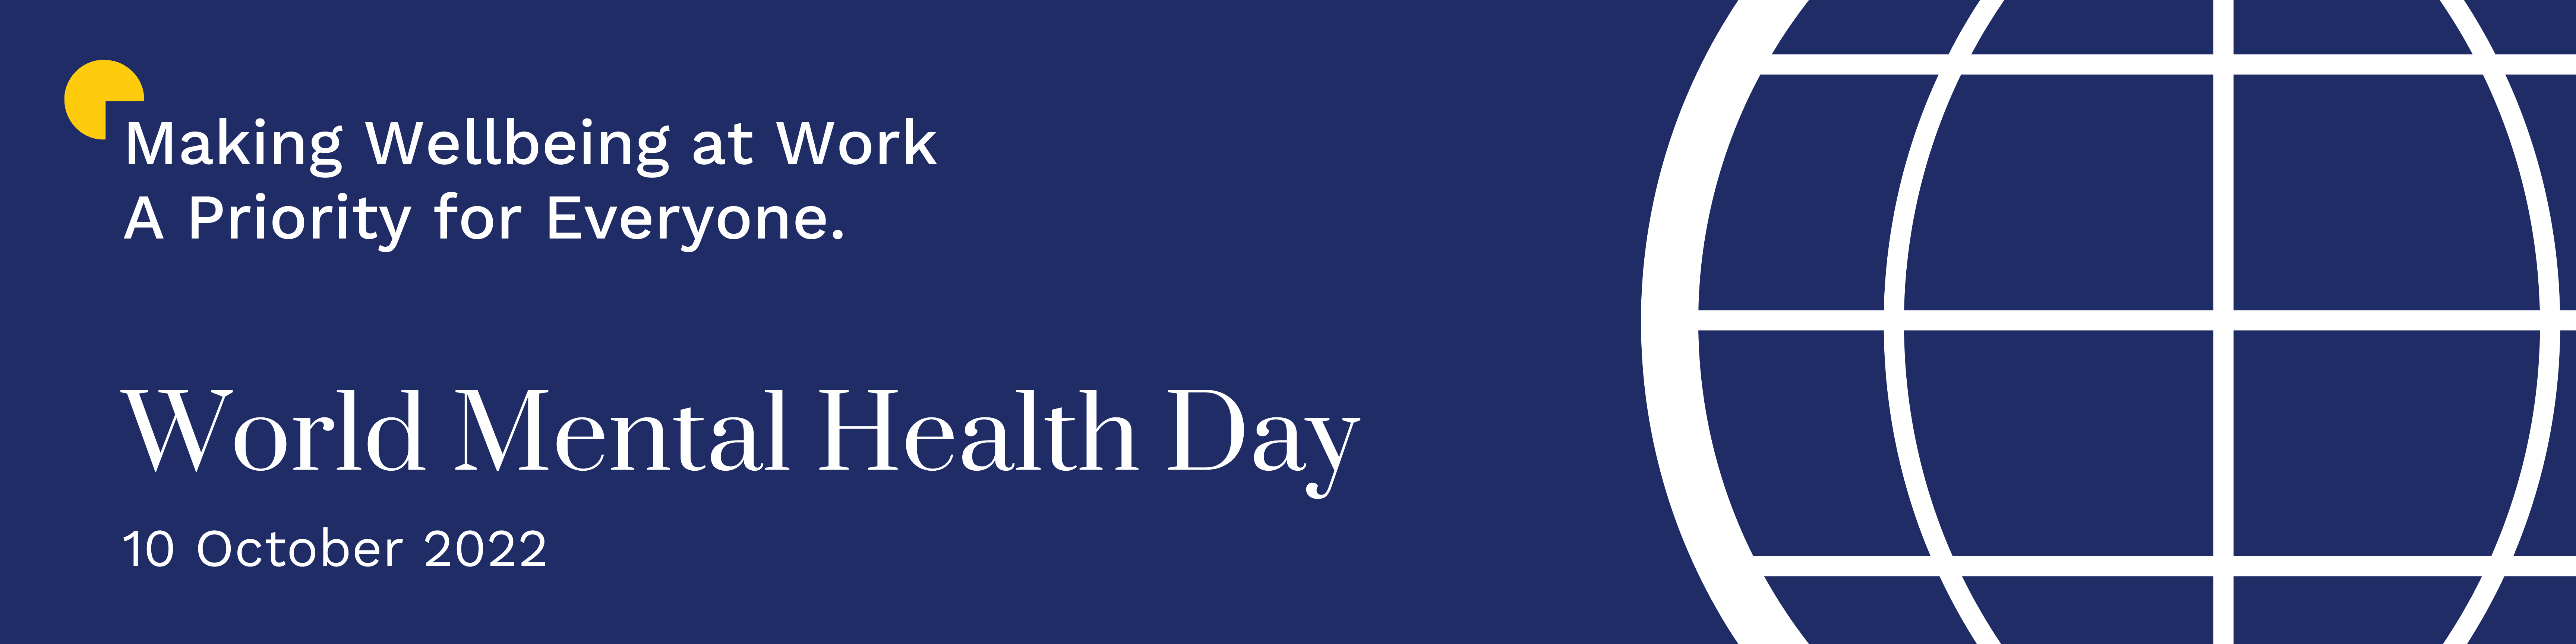 World Mental Health Day (72 × 18 in)